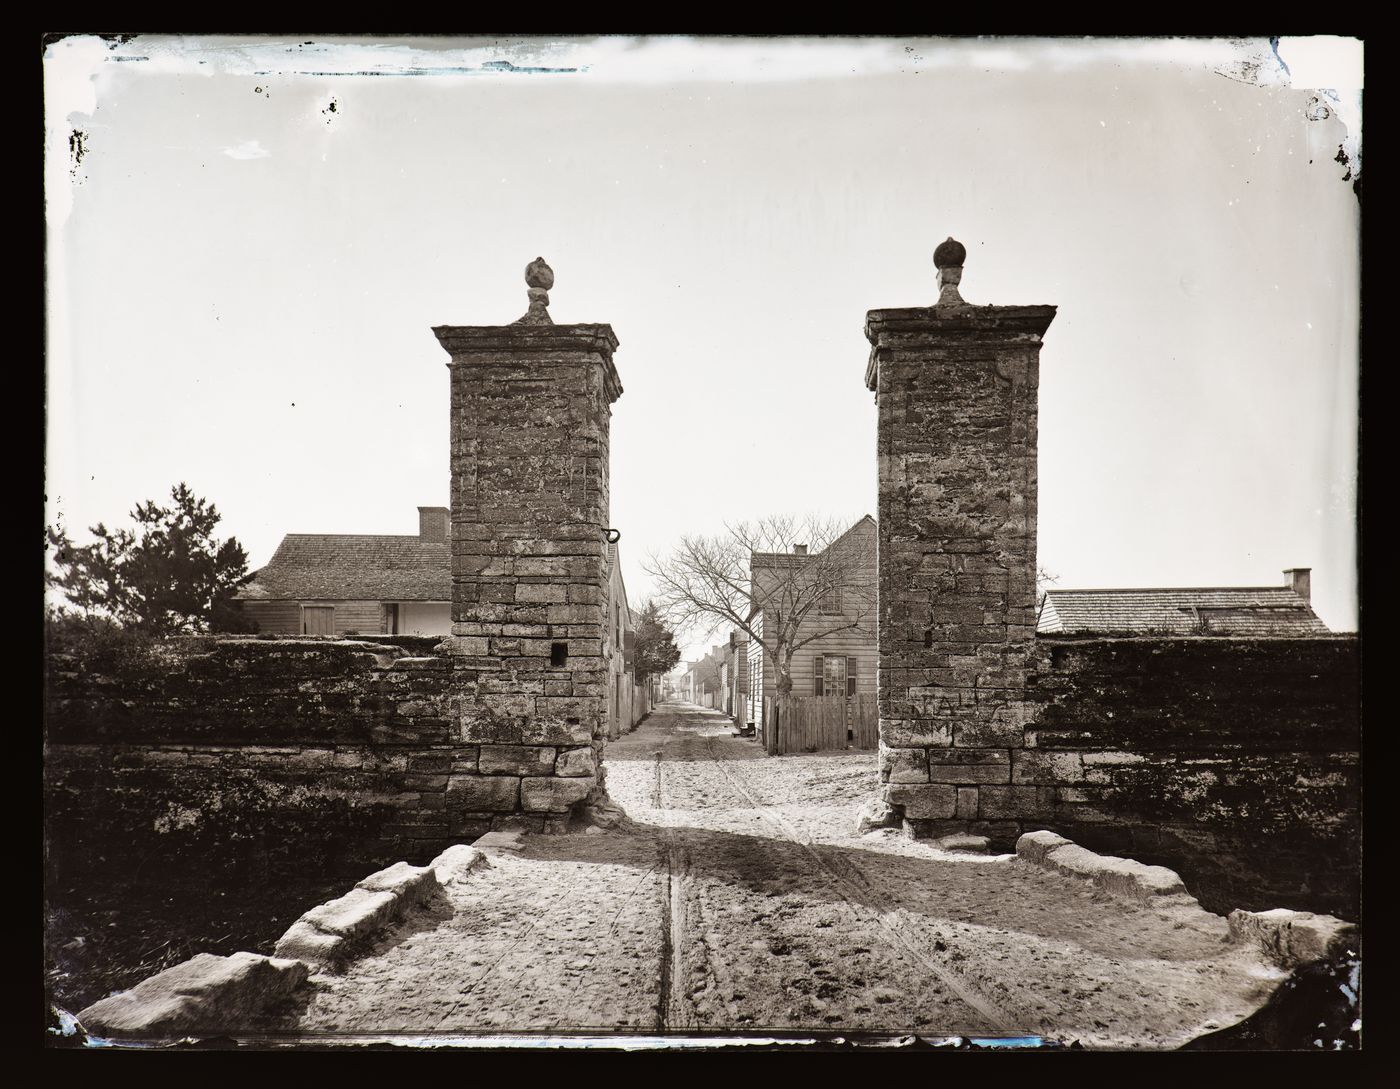 View of city gates, St. Augustine, Florida, United States of America